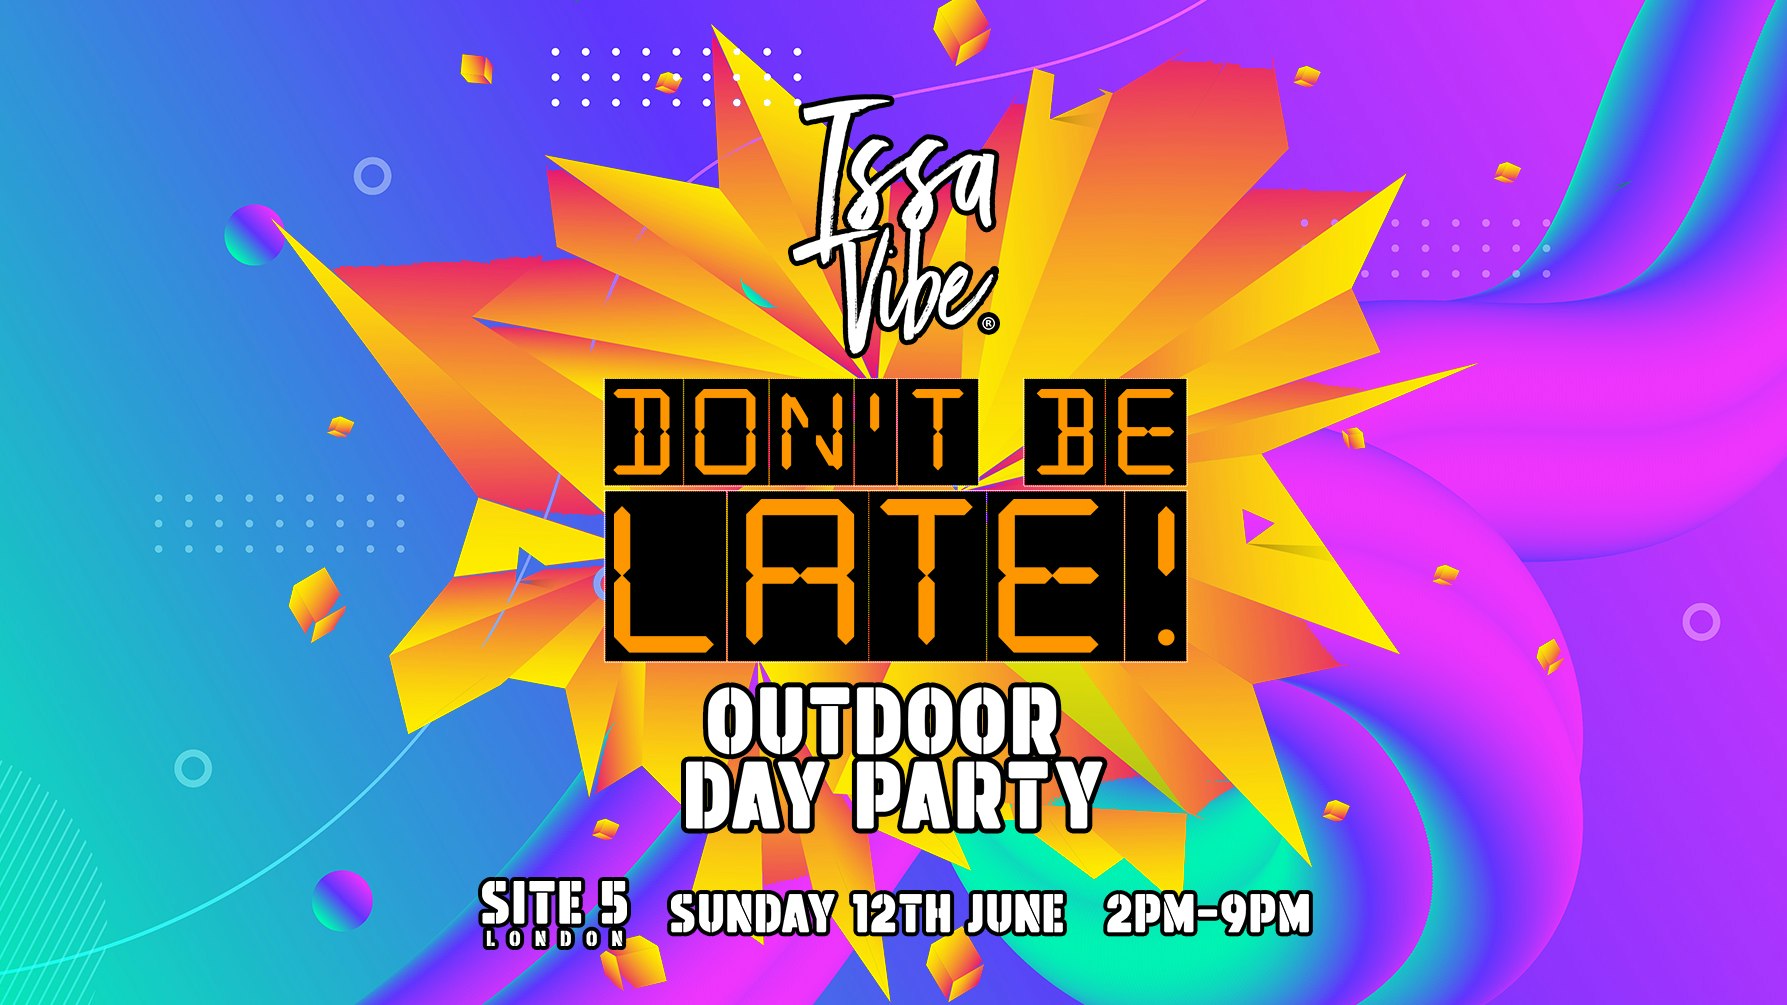 Issa Vibe Outdoor Day Party: Don’t Be Late!